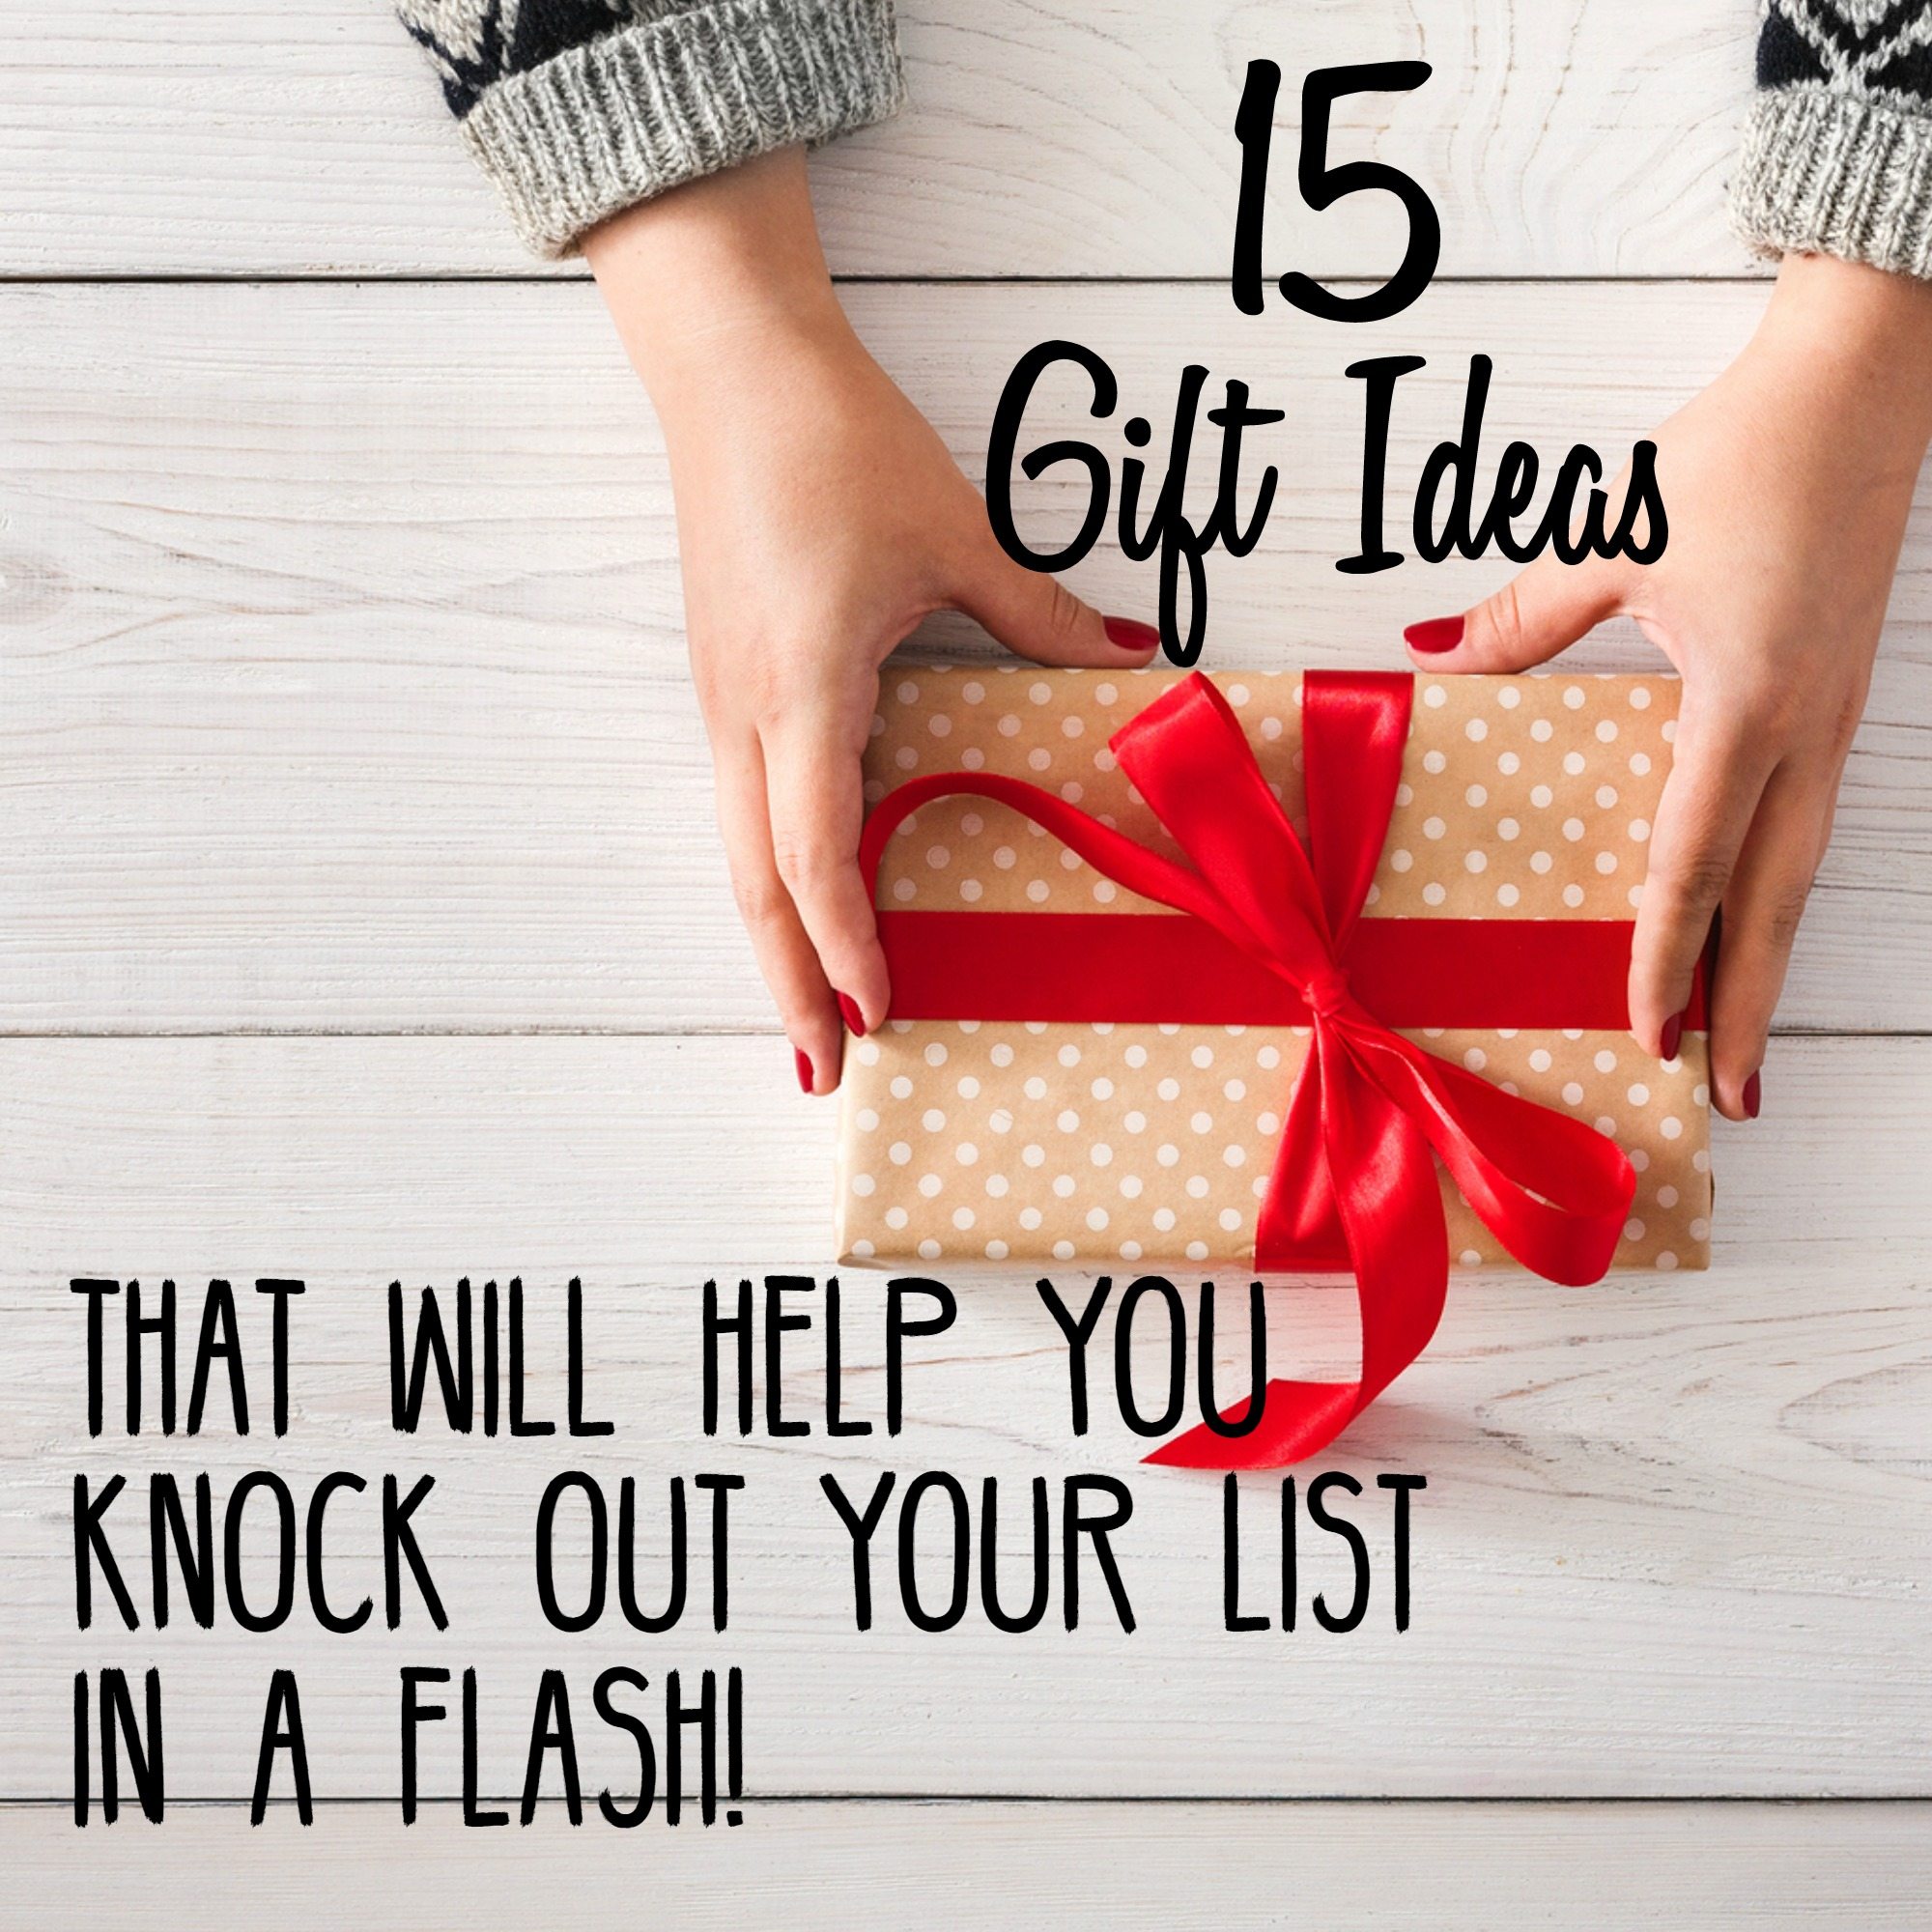 15 GIFT Ideas that Will Help You Knock Out Your List in a FLASH!